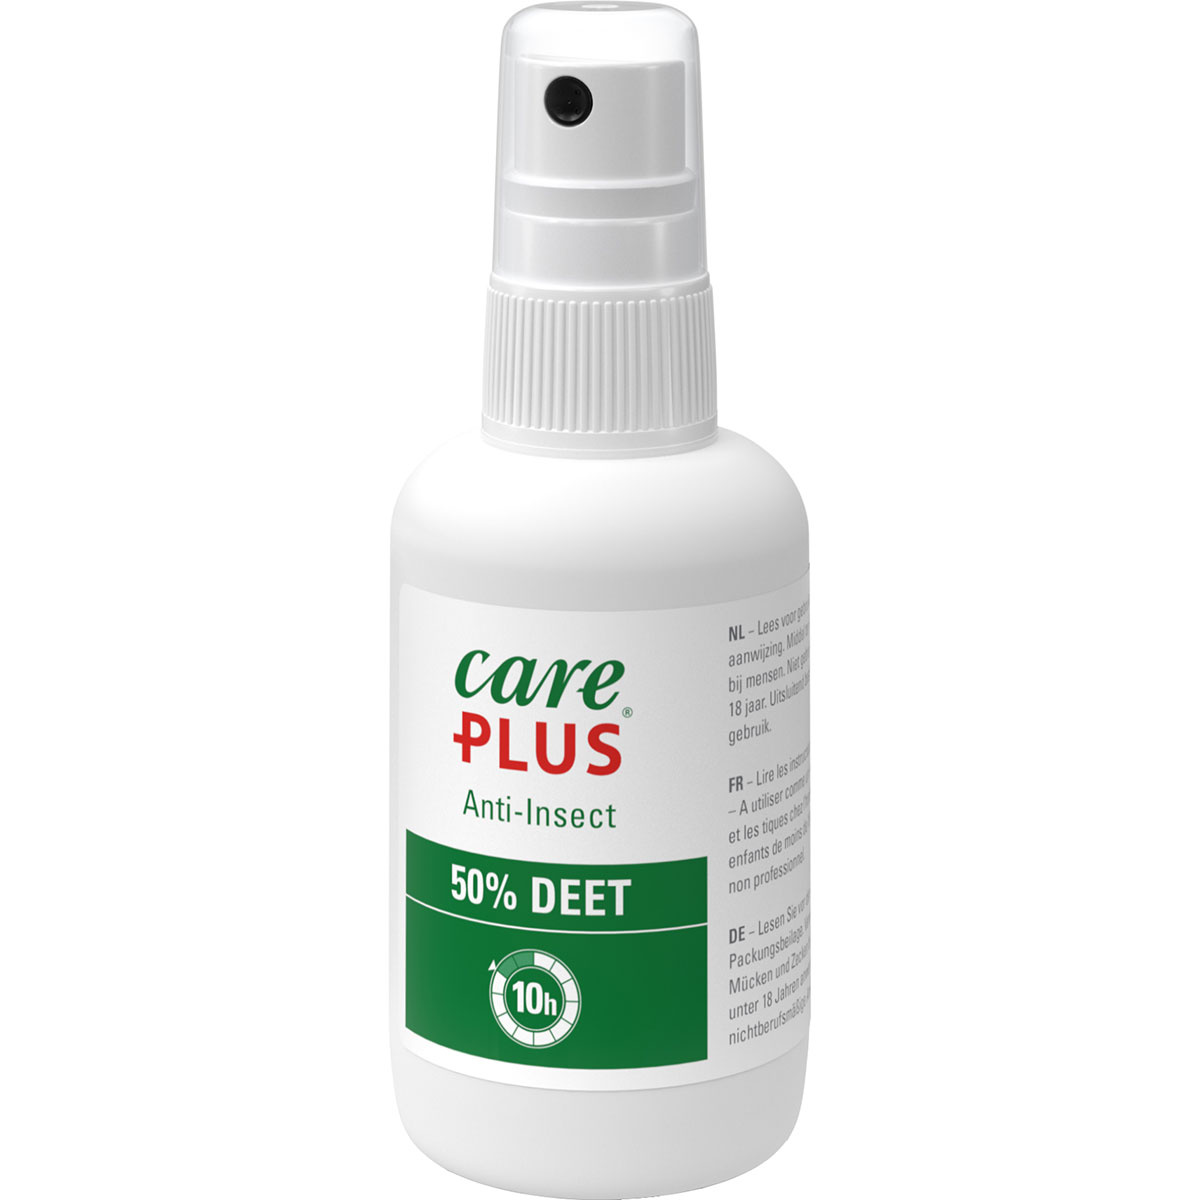 Image of Care Plus Anti-Insect DEET Spray 50%